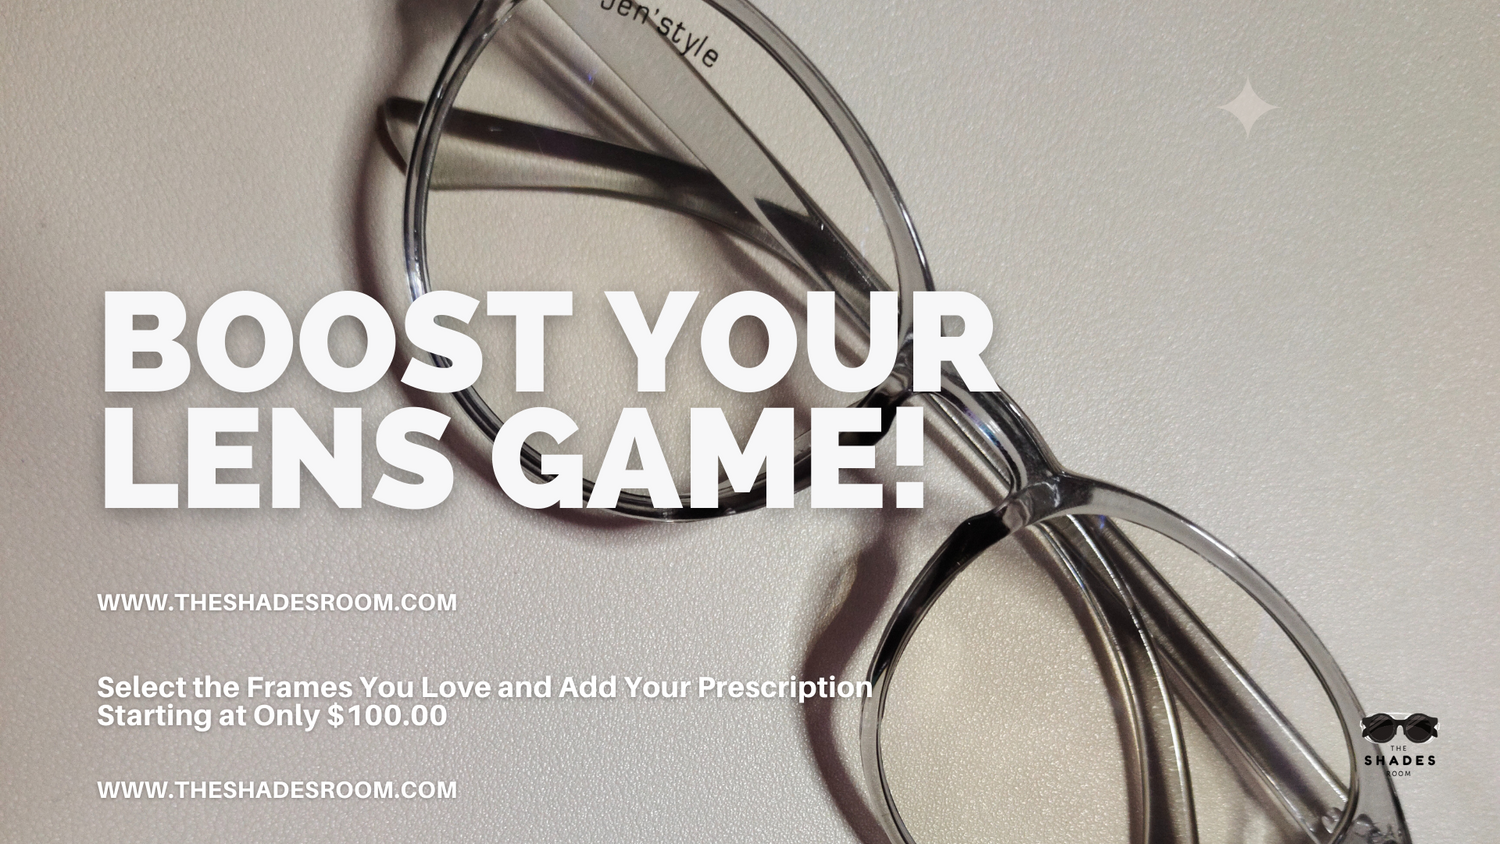 Select the Frames You Love and Add Your Prescription Starting at Only $100.00